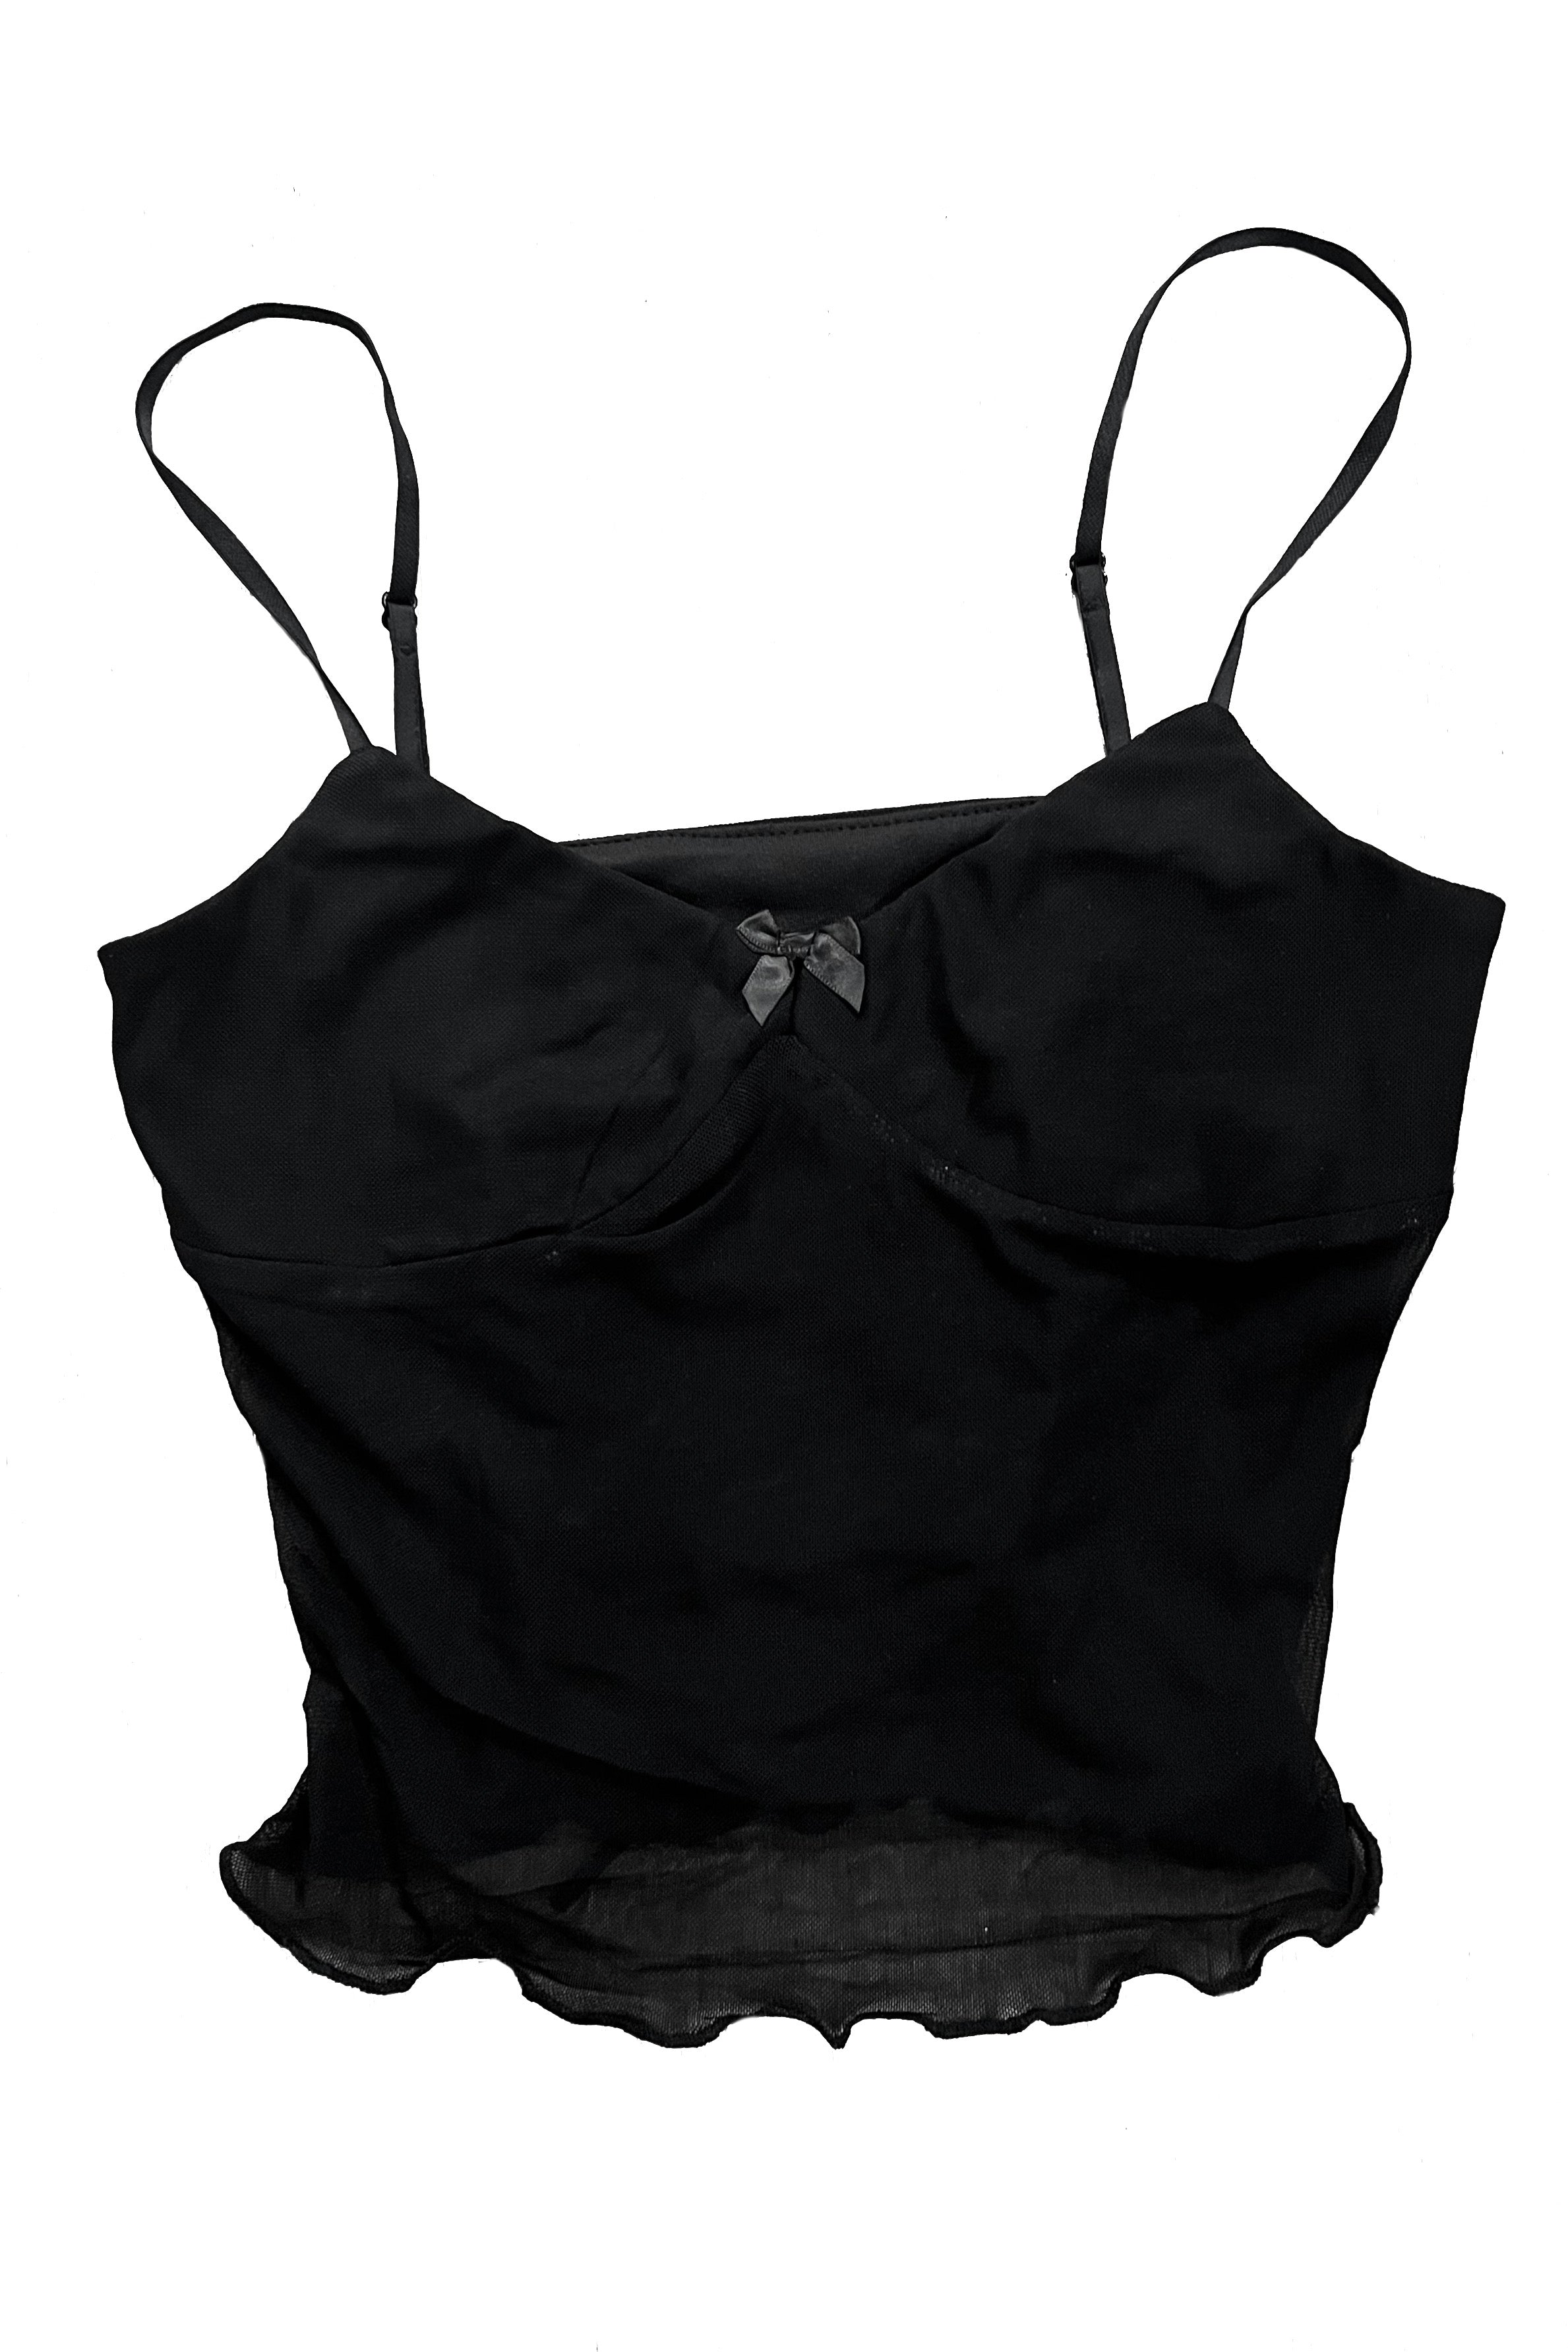 Babs Black Camisole